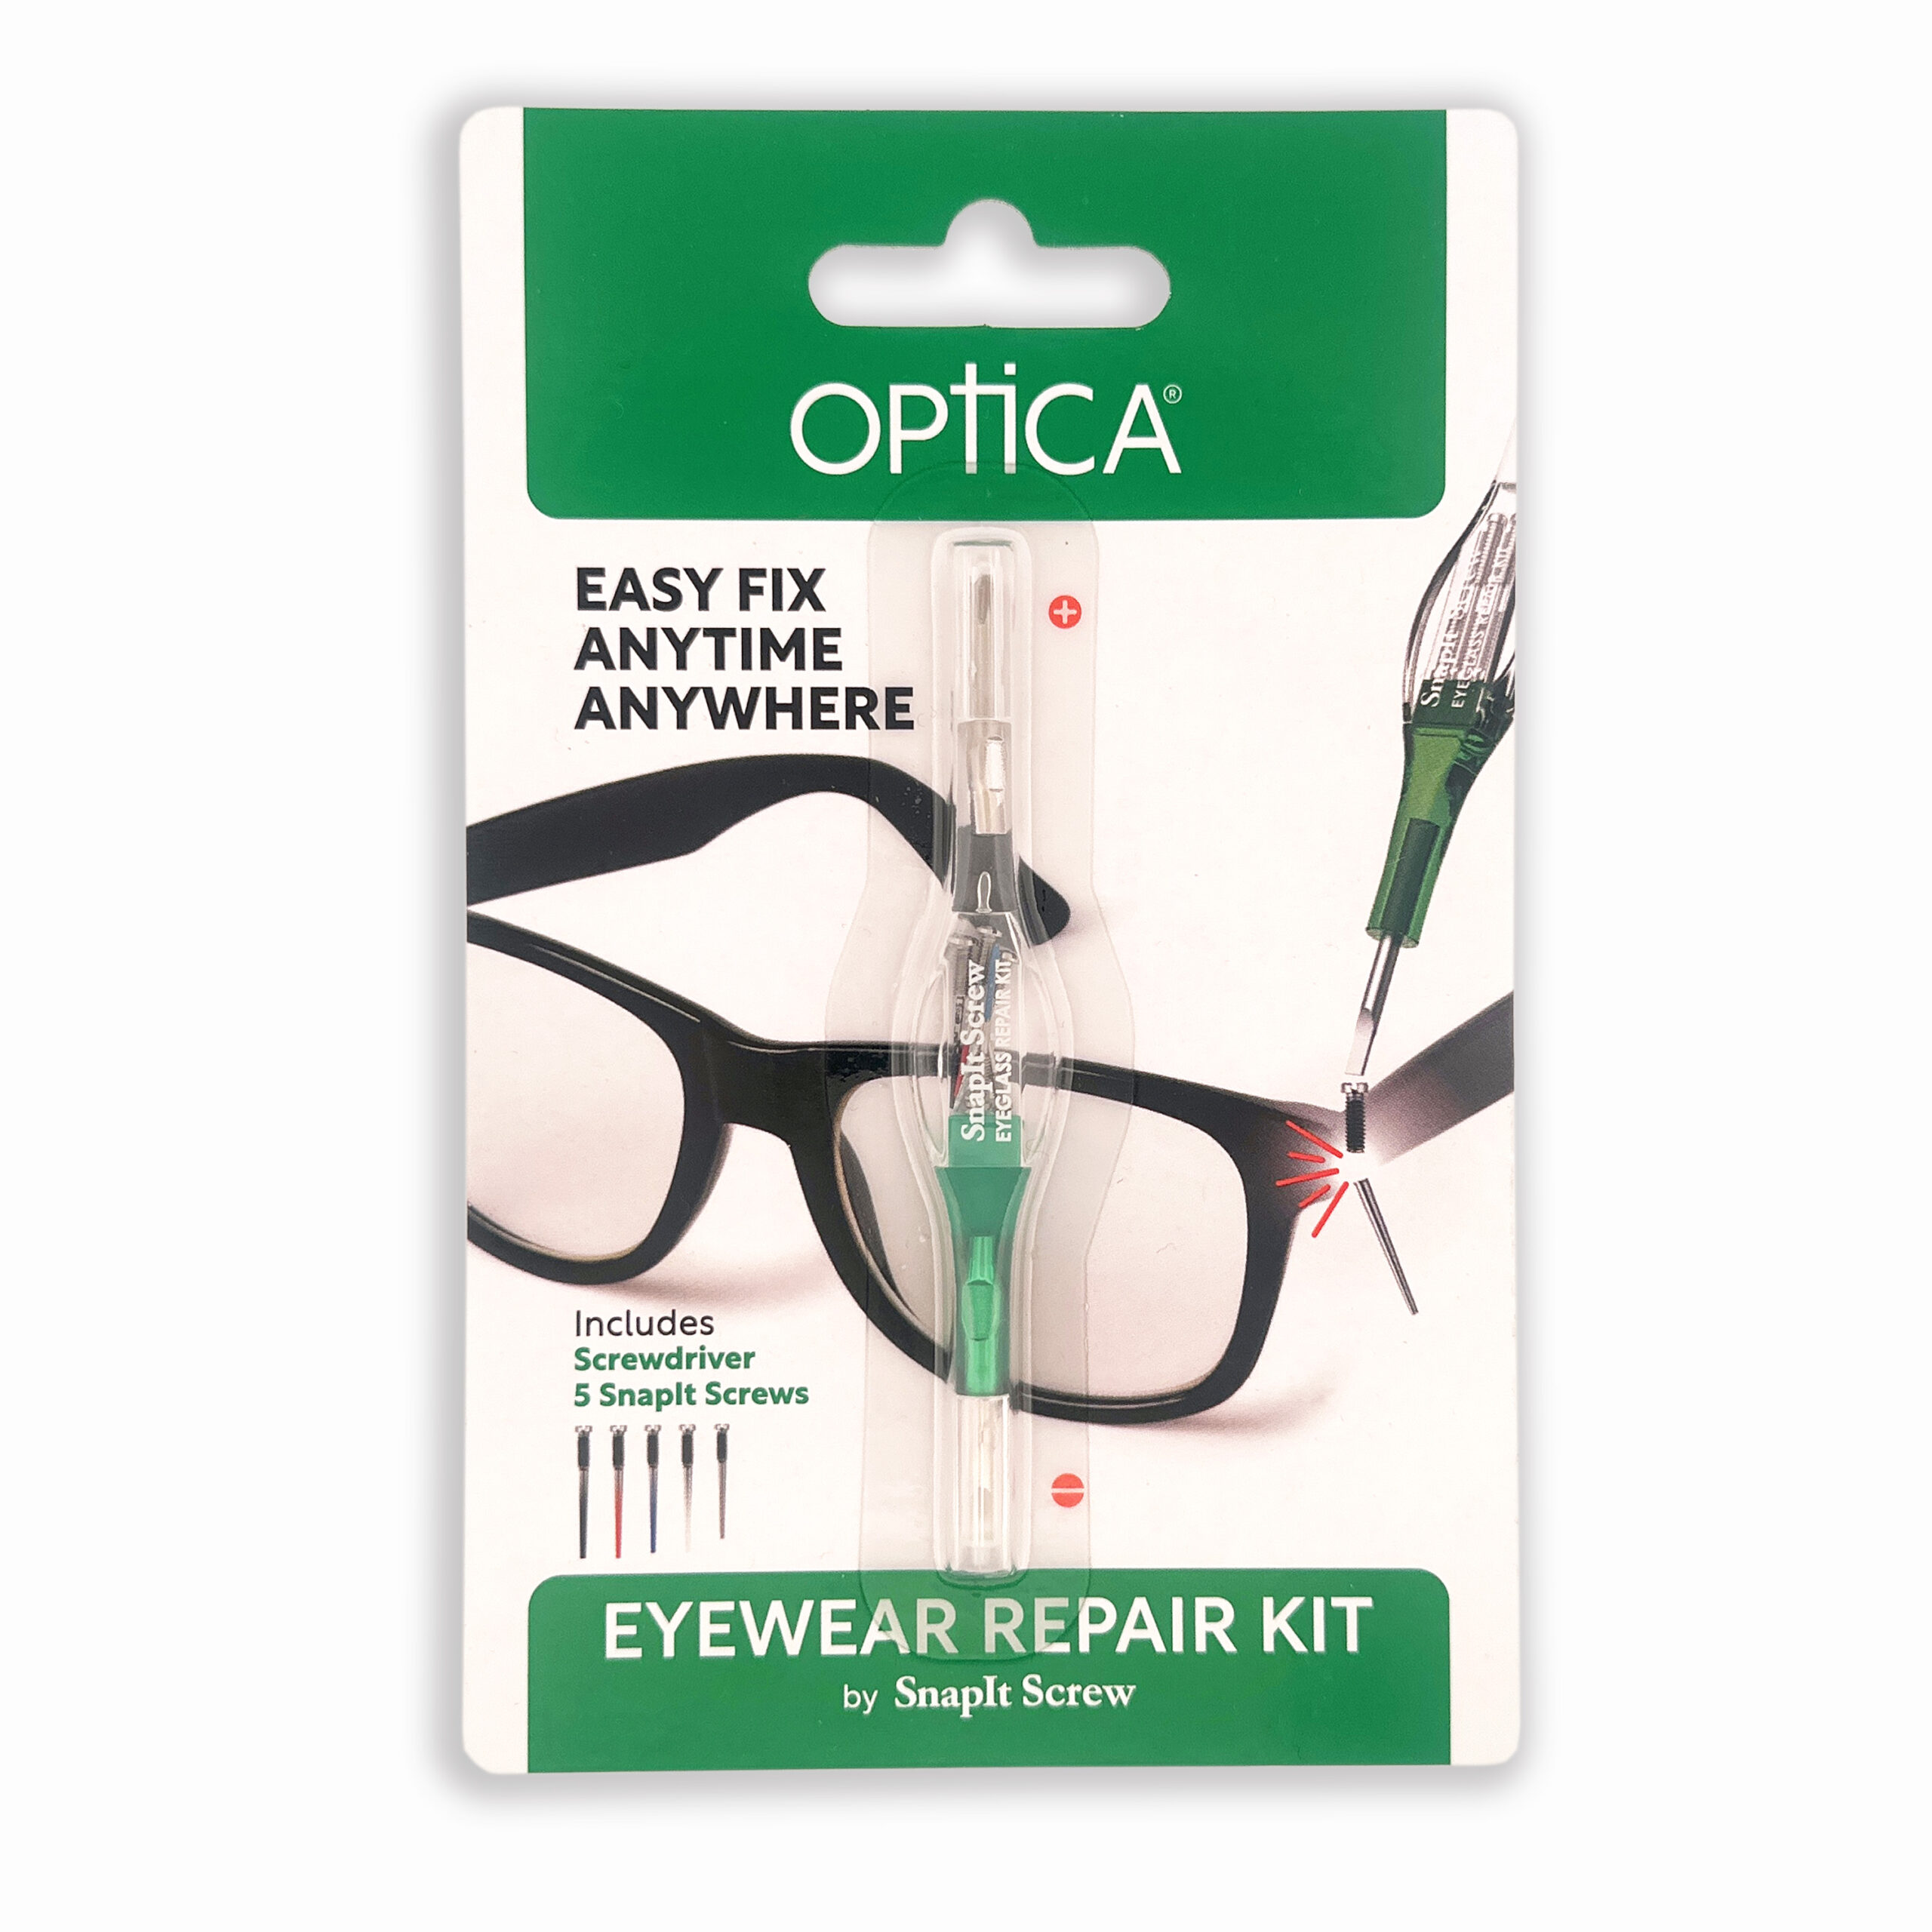 Glasses Repair Kit with the Snapit Screw